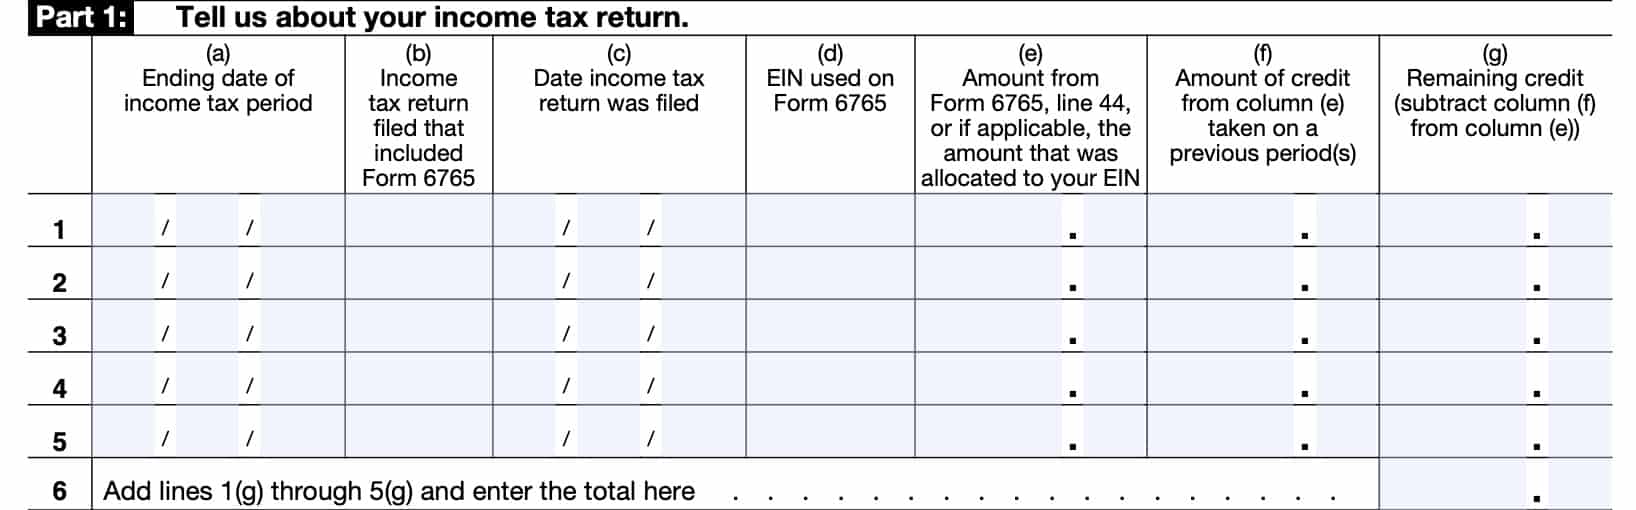 part 1: tell us about your income tax return